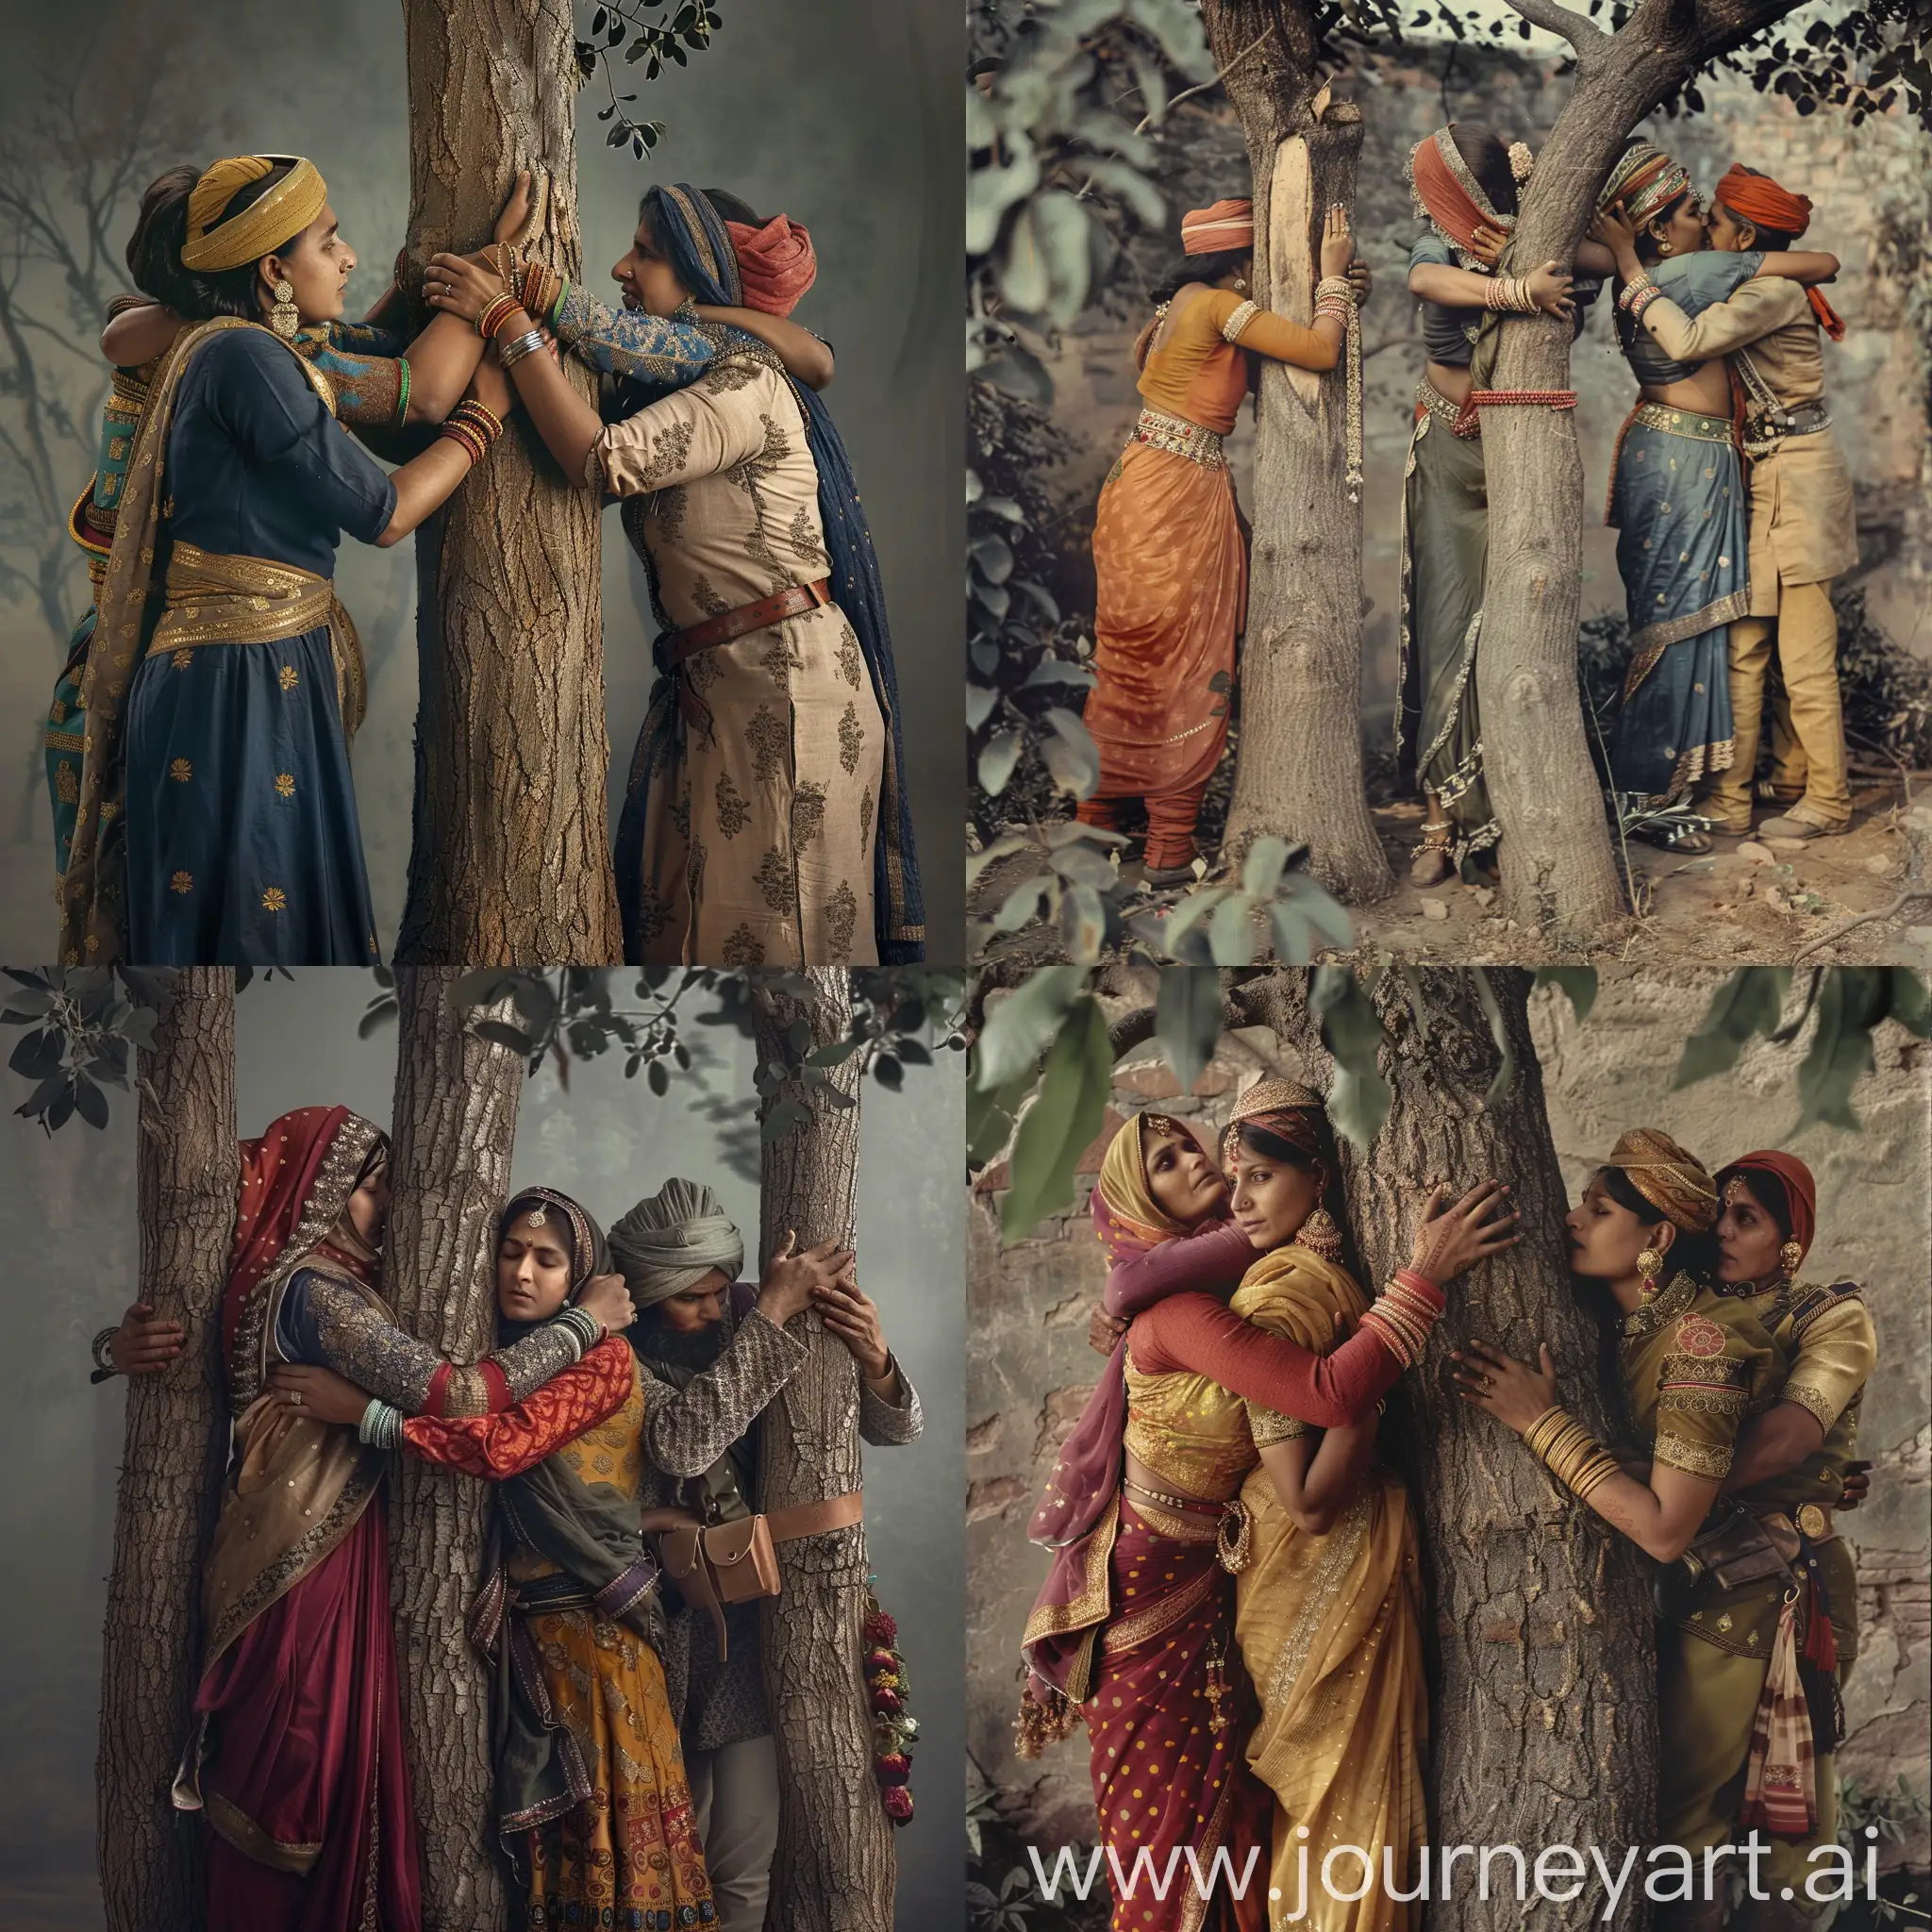 Year is 1800. Imagine three rajasthani women hugging three different trees to protect it from woodcutters. Woodcutters are wearing rajput soldier uniform.